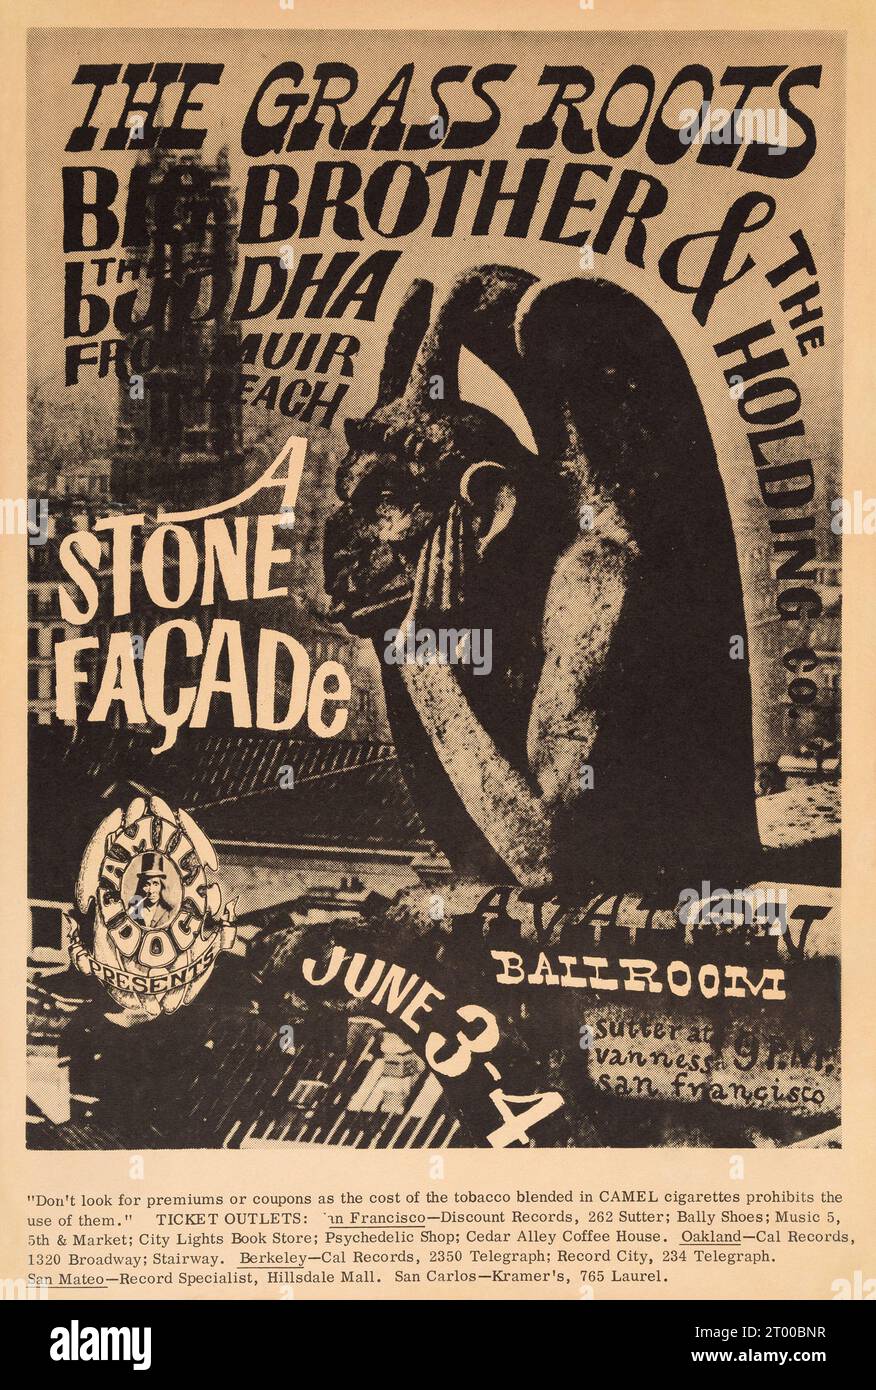 The Grass Roots, Big Brother and the Holding Company 'Stone Facade' - Avalon Ballroom - Vintage Concert Poster - Family Dog - June 3, 4 1966 Stock Photo